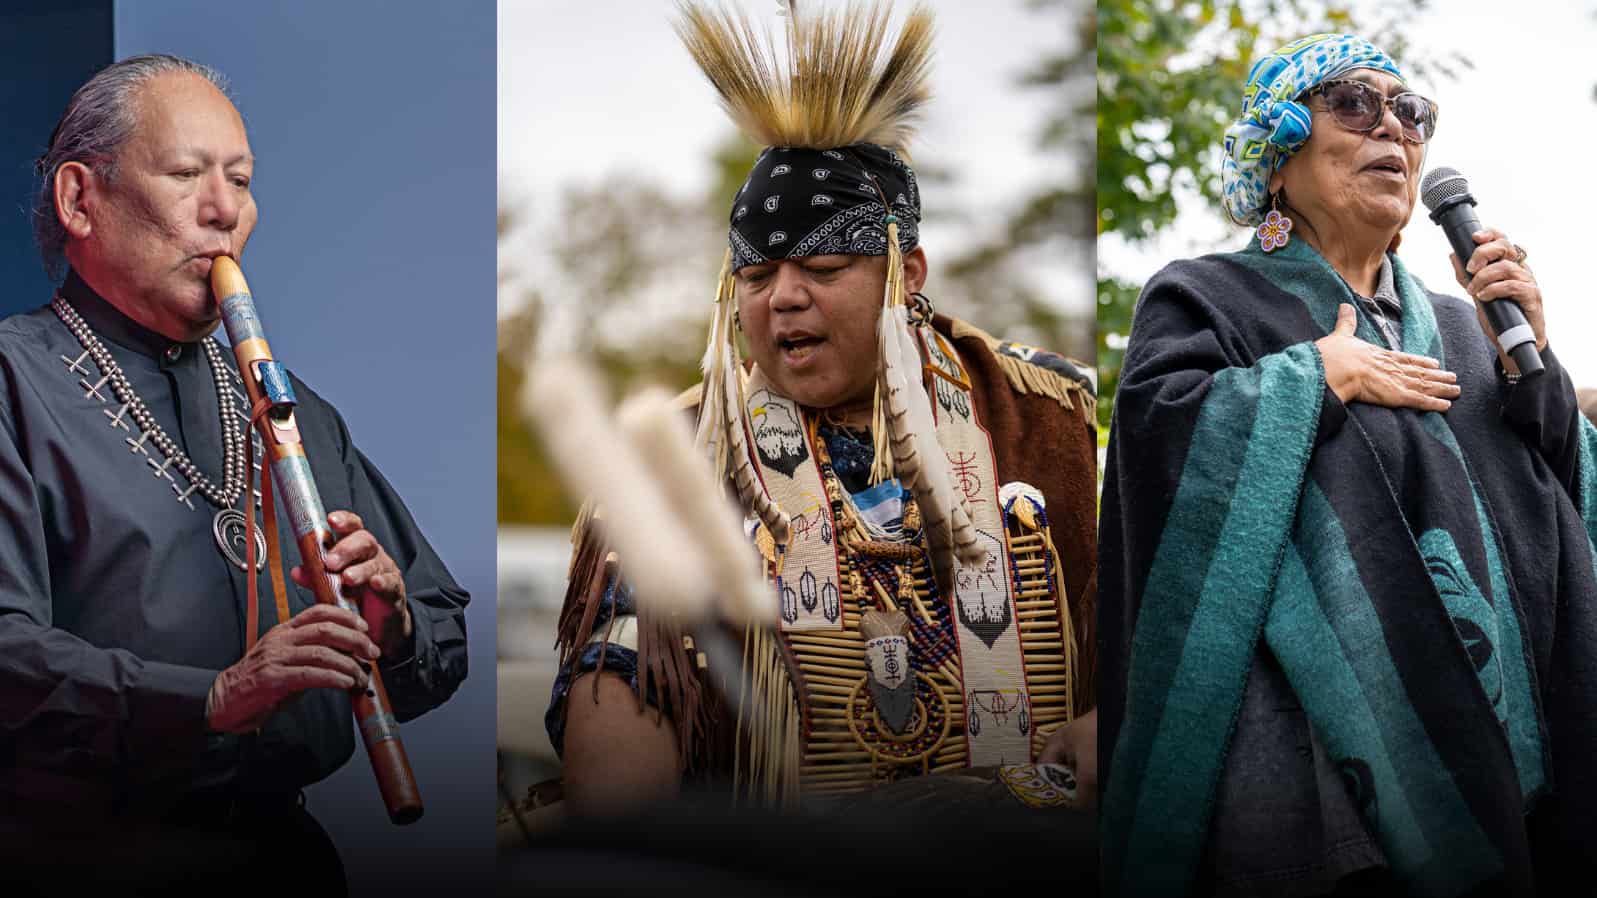 R. Carlos Nakai, the world’s premier performer of the Native American flute; Shawn Stevens, celebrated Mohican storyteller; Cheryl Fairbanks, Esq, renowned Indigenous Peacemaker, will perform and speak in the annual celebration Honoring Native America with the Alliance for a Viable Future. Press photos courtesy of the Mahaiwe Performing Arts Center